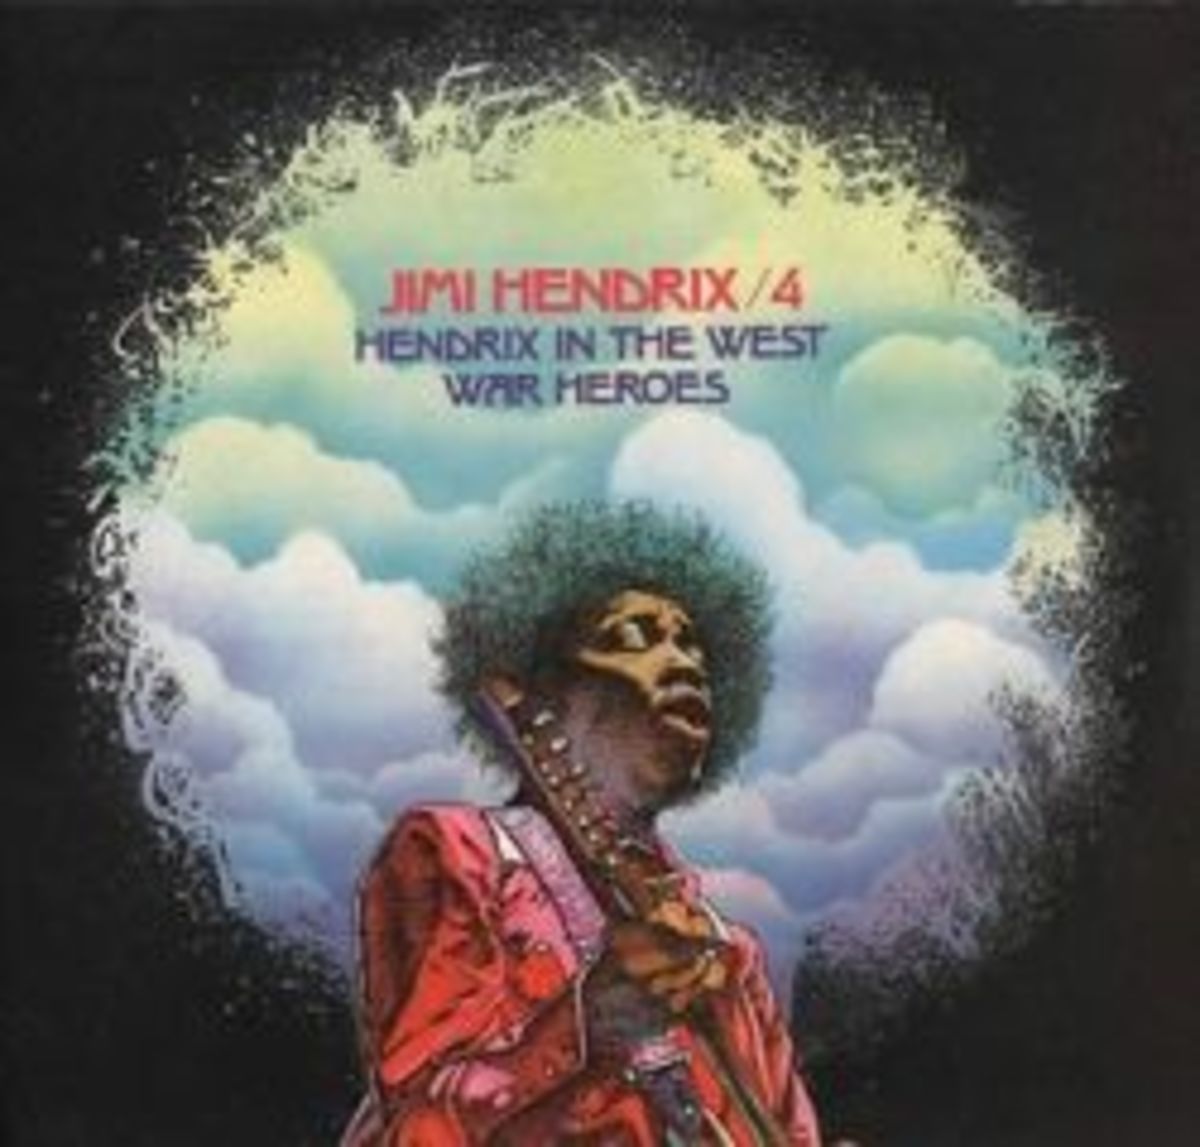 Jimi Hendrix 4 "Hendrix In The West" & "War Heroes" Barclay Records 80.587 -- Barclay Records 80.588 12" 2 LP Vinyl Record Set (1975) French  Pressing